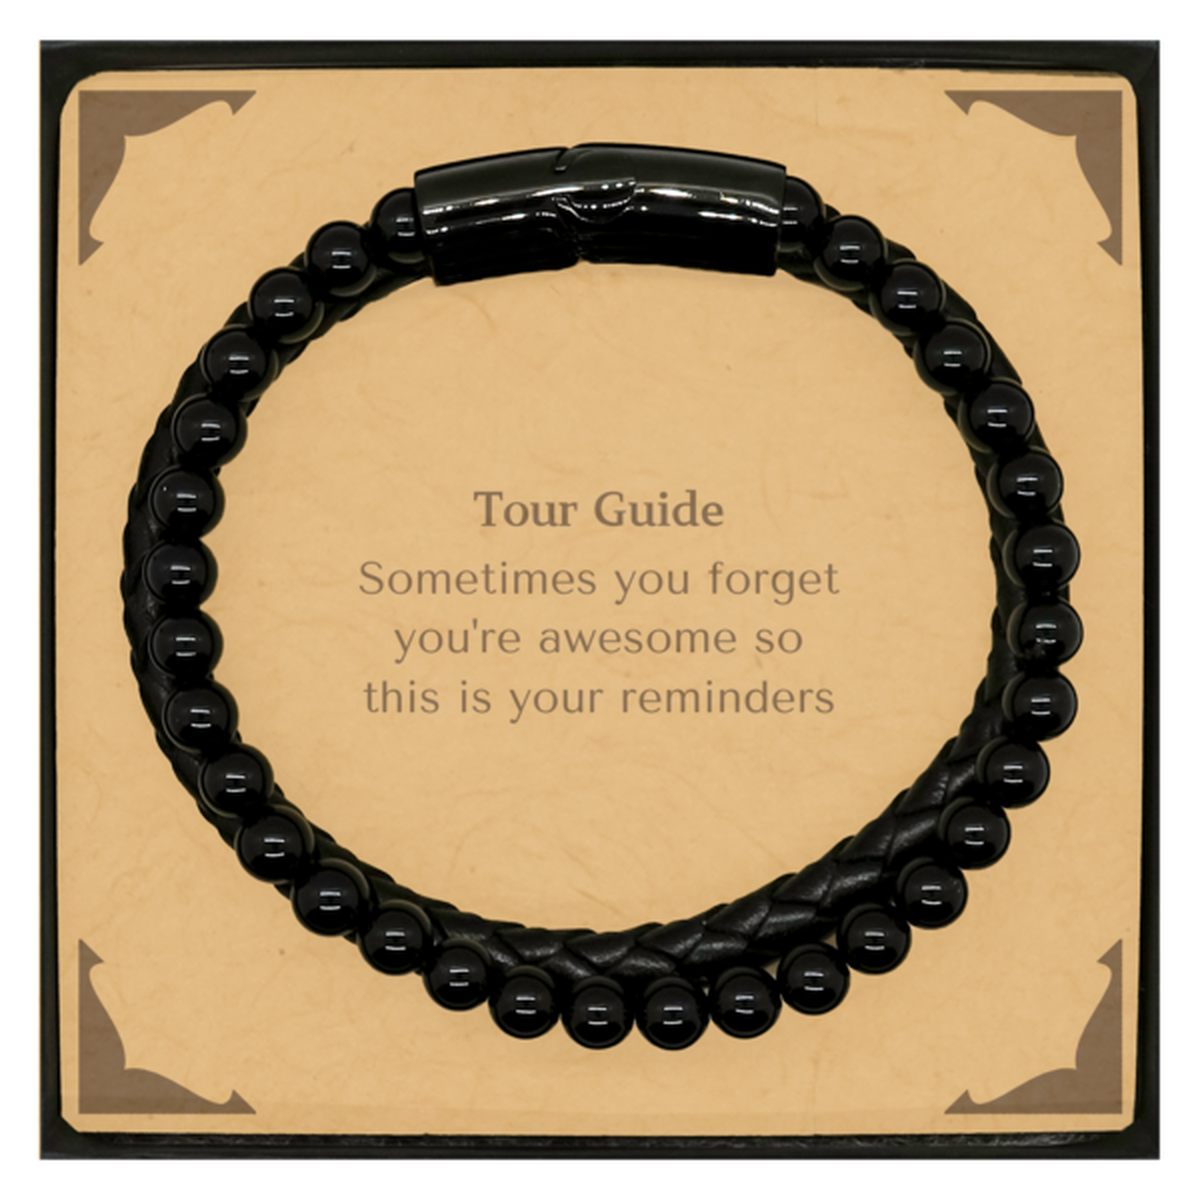 Sentimental Tour Guide Stone Leather Bracelets, Tour Guide Sometimes you forget you're awesome so this is your reminders, Graduation Christmas Birthday Gifts for Tour Guide, Men, Women, Coworkers